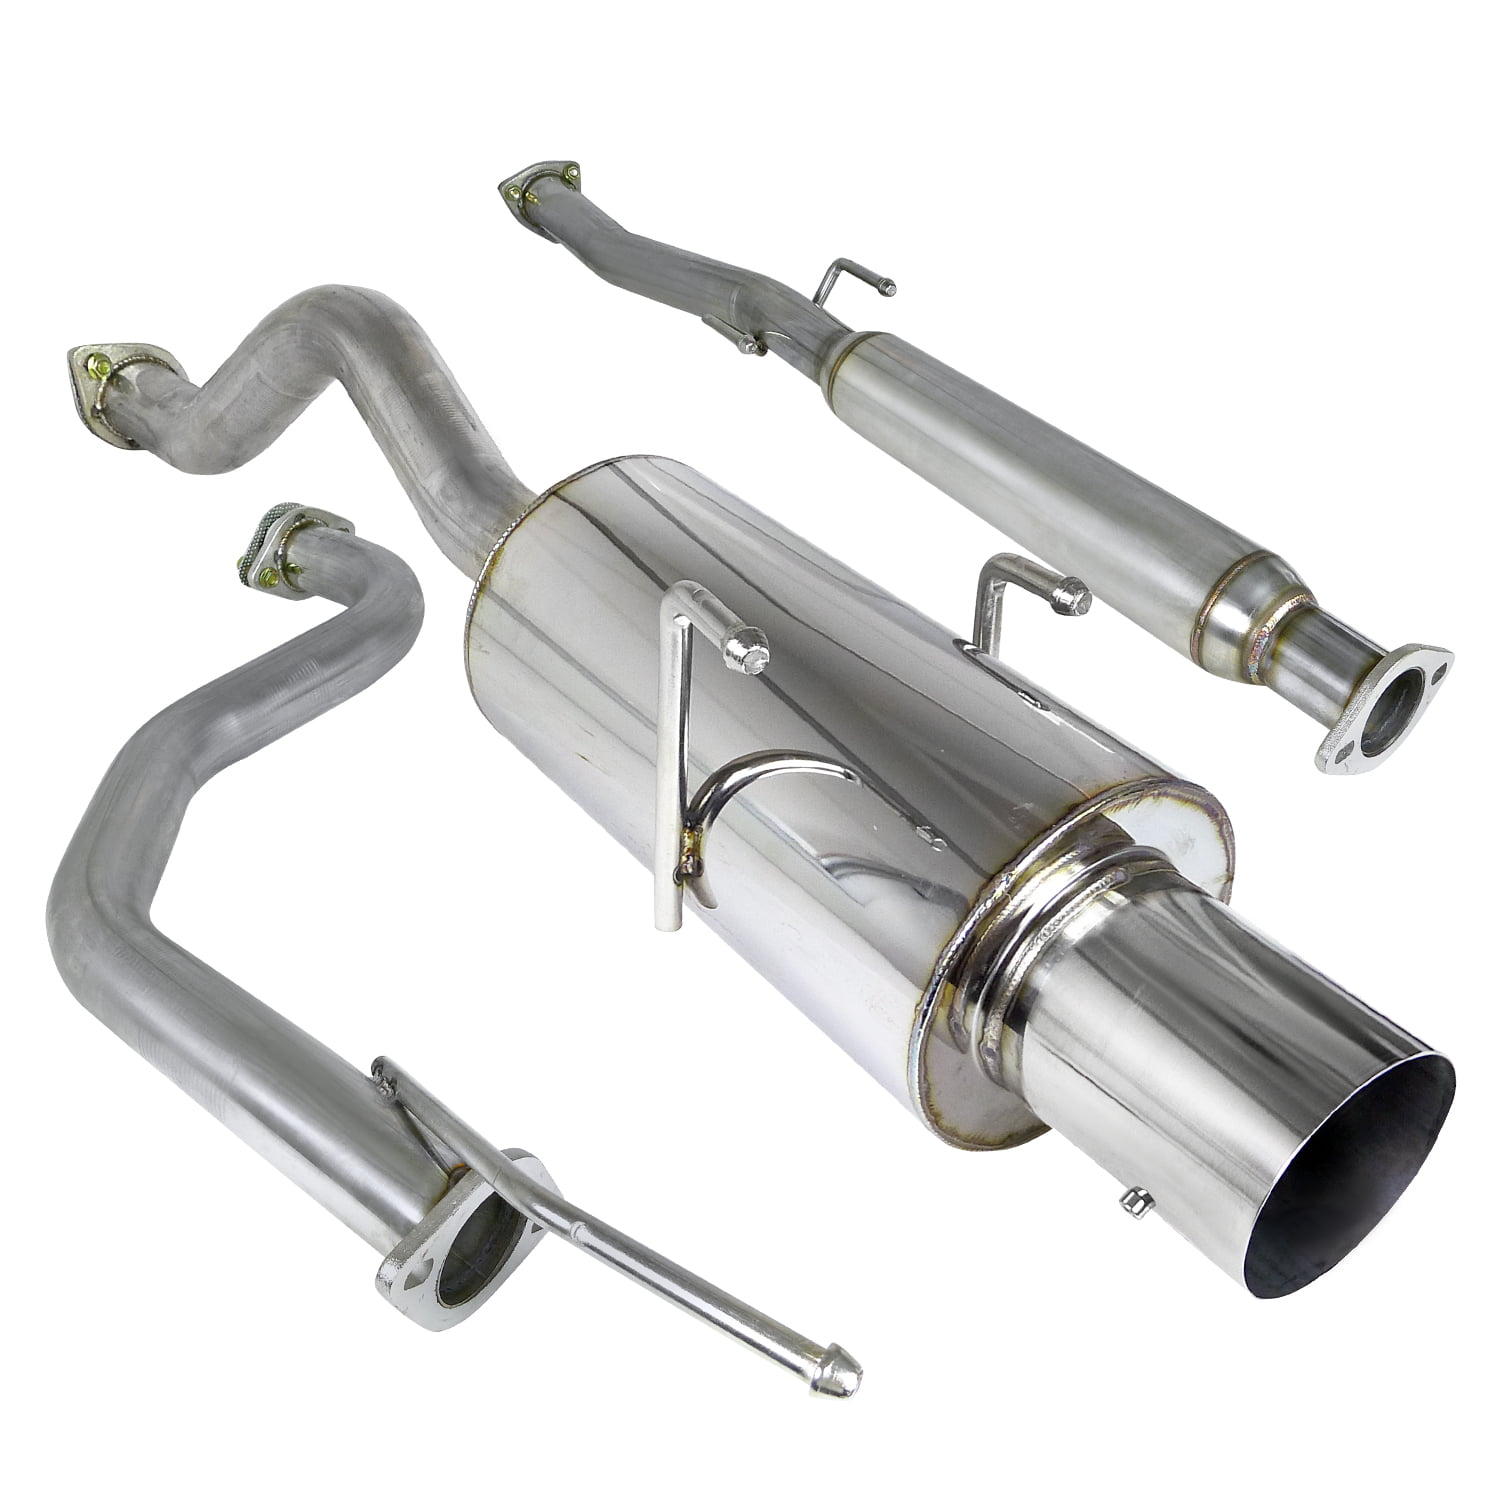 BLACK Rxmotor 2.5 to 3 Piping Catback Exhaust System with 4.5 N1 Burn Tip For Acura Integra Ls Rs Gs